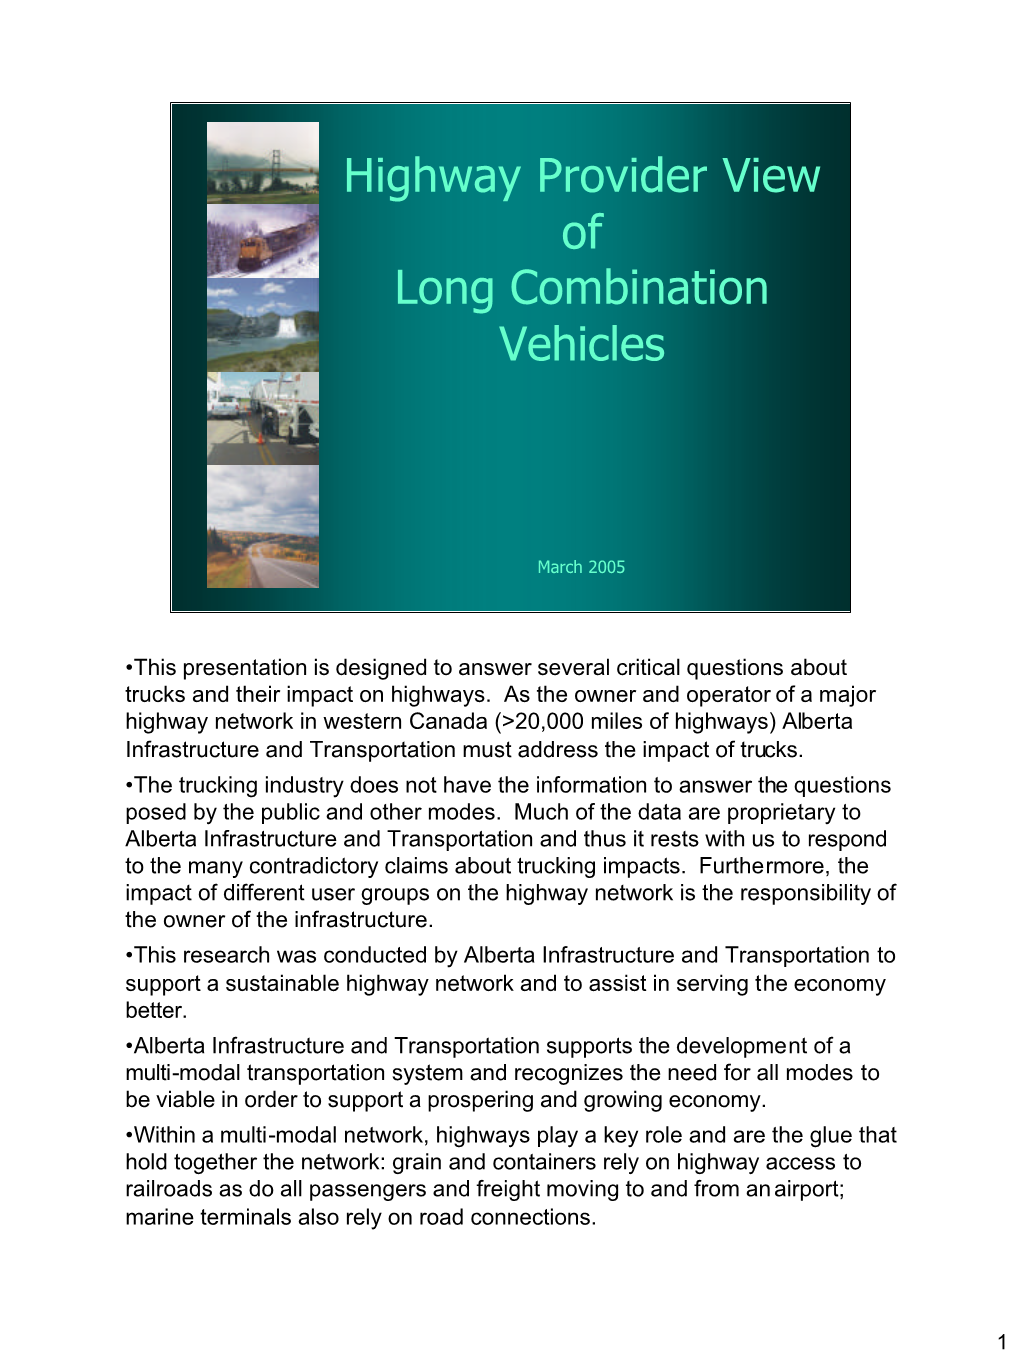 Highway Provider View of Long Combination Vehicles